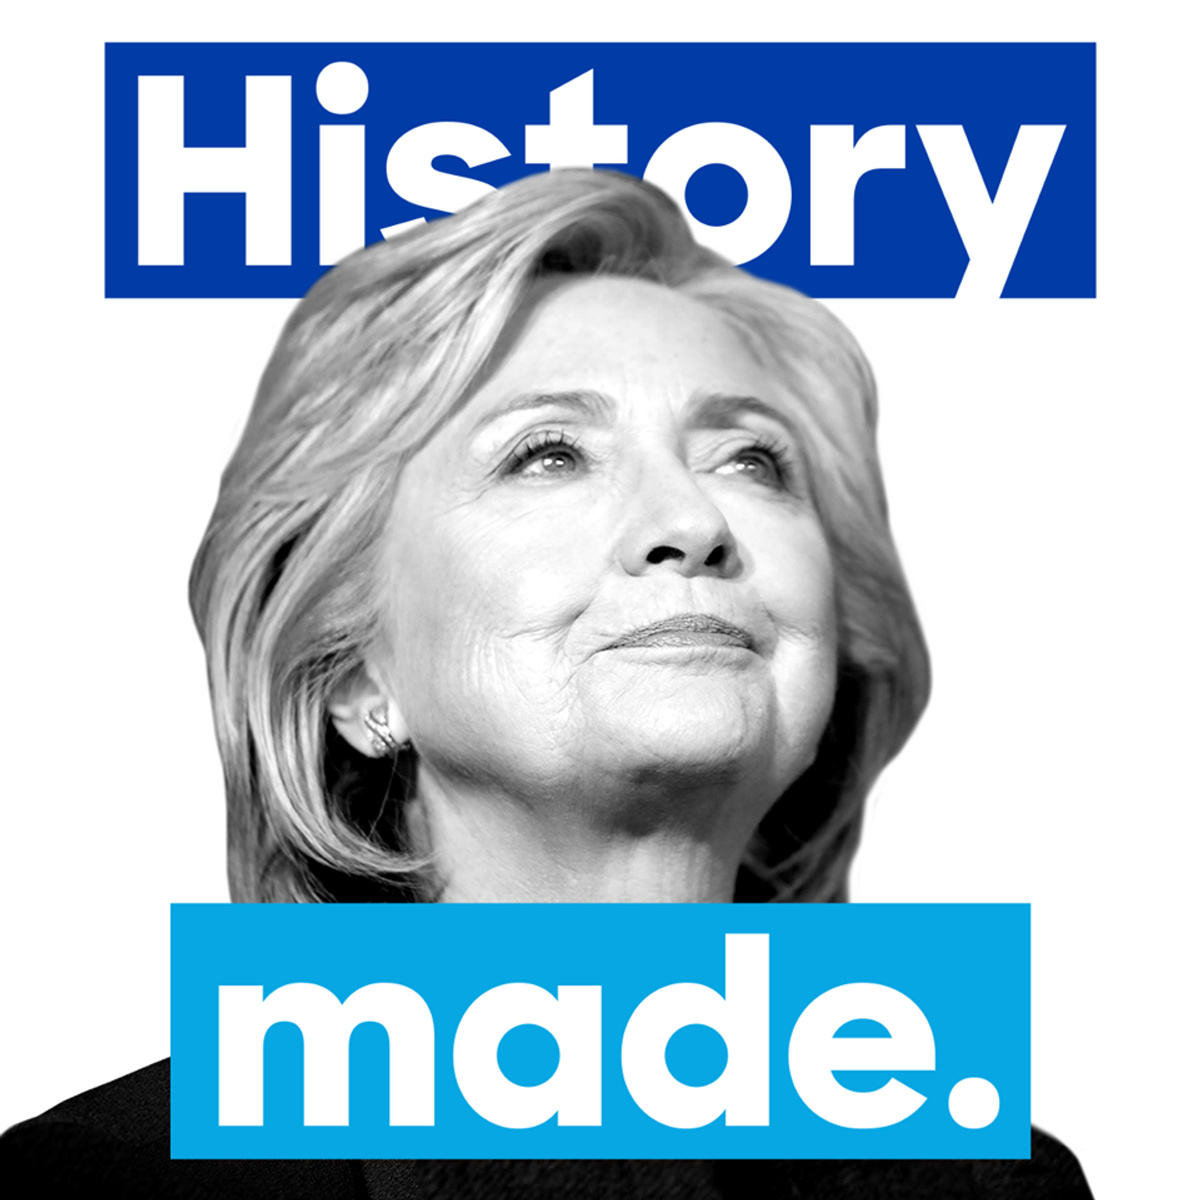 Why Clinton's Nomination Is So Historical